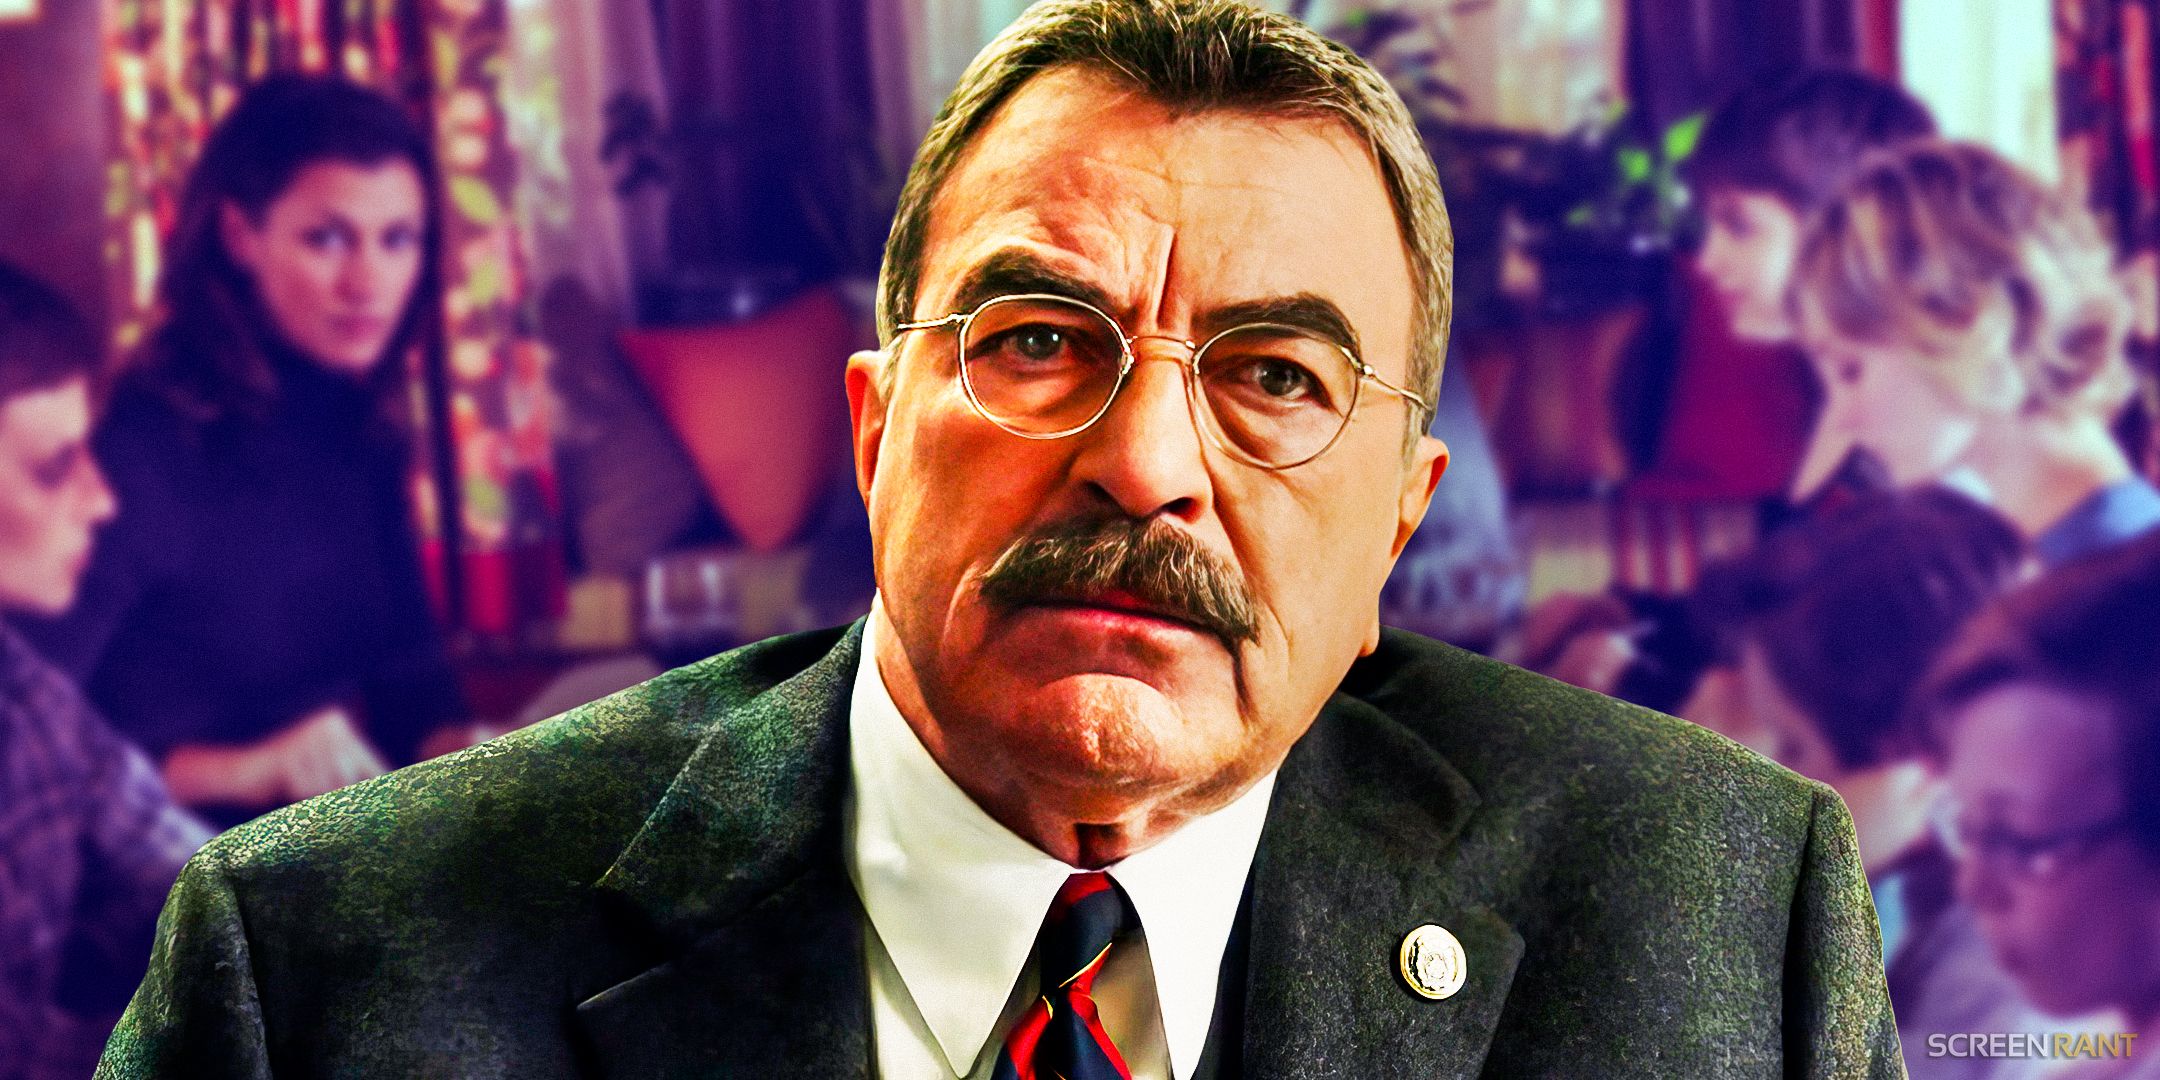 Tom Selleck as Frank Reagan from Blue Bloods